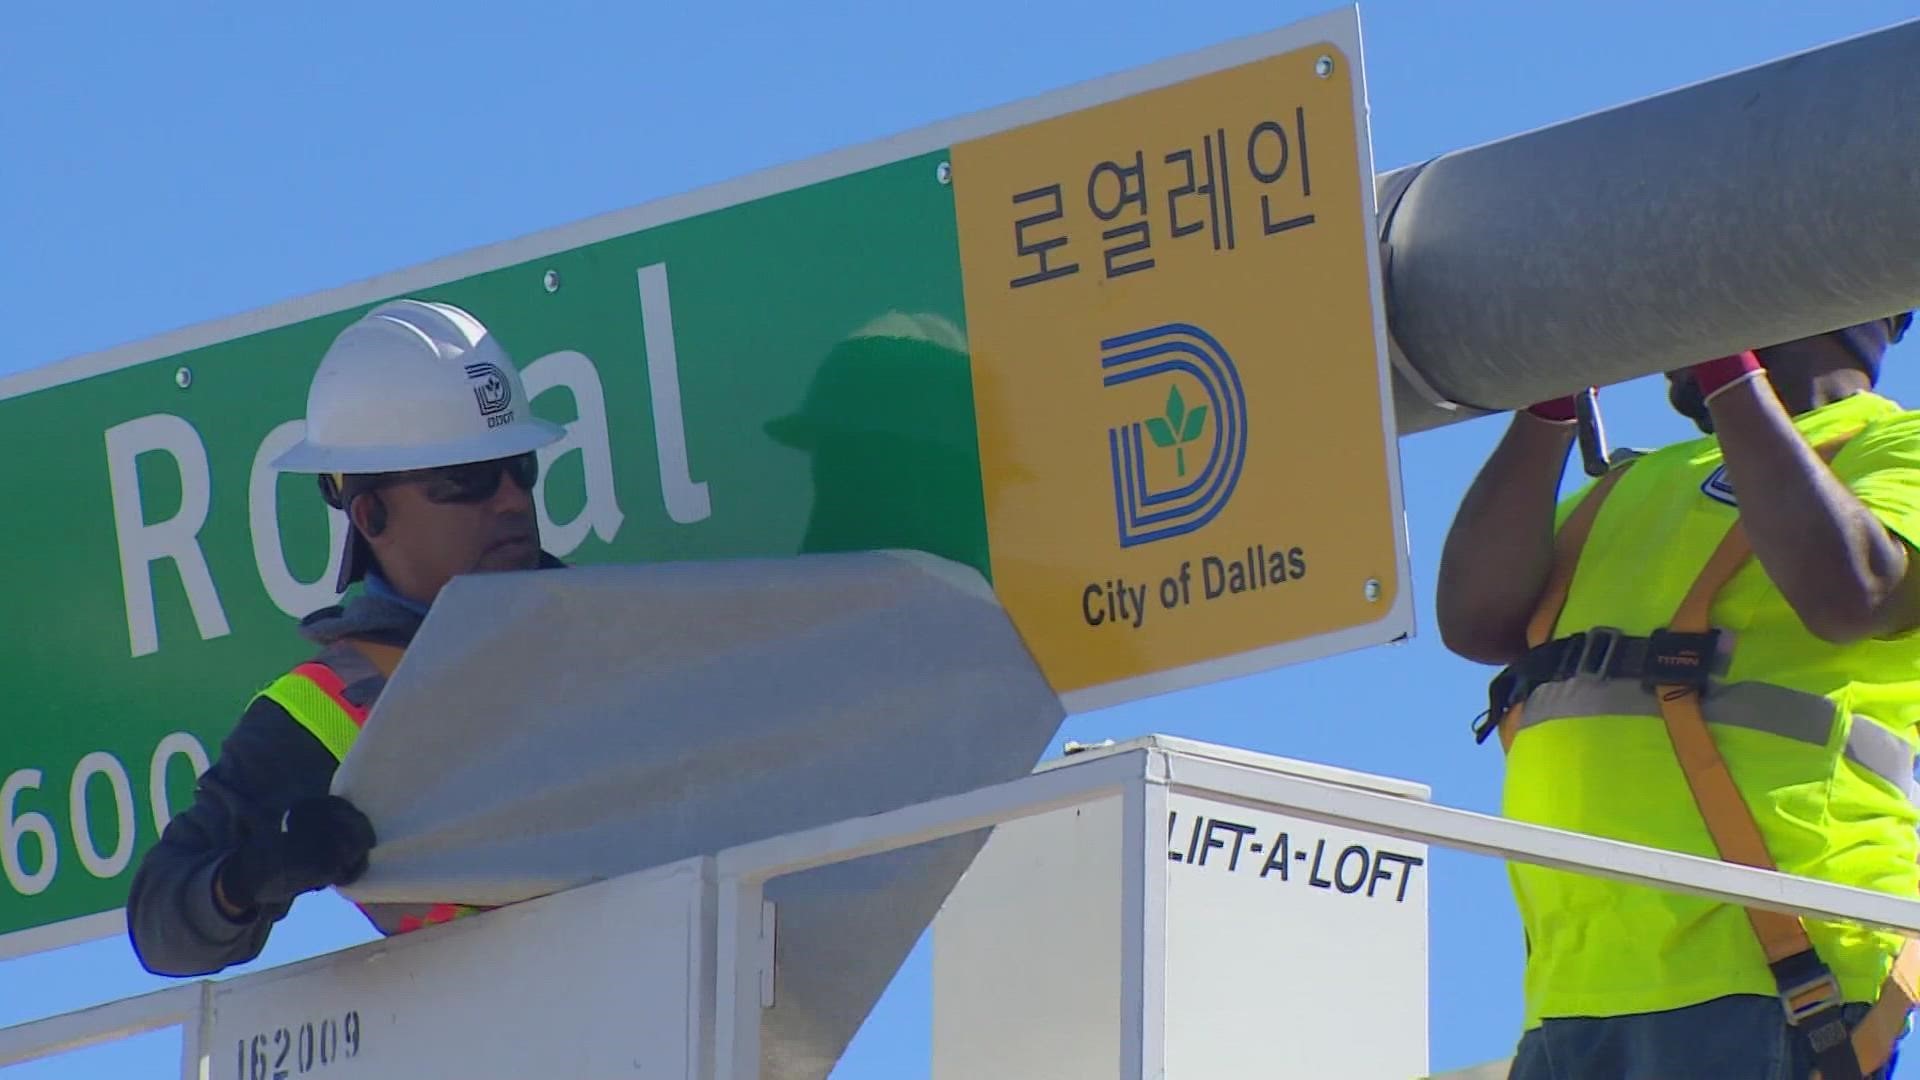 "And to see that sign up there in our native language, is very rewarding," John Lee said. "And also a tremendous sense of pride that our community belongs."